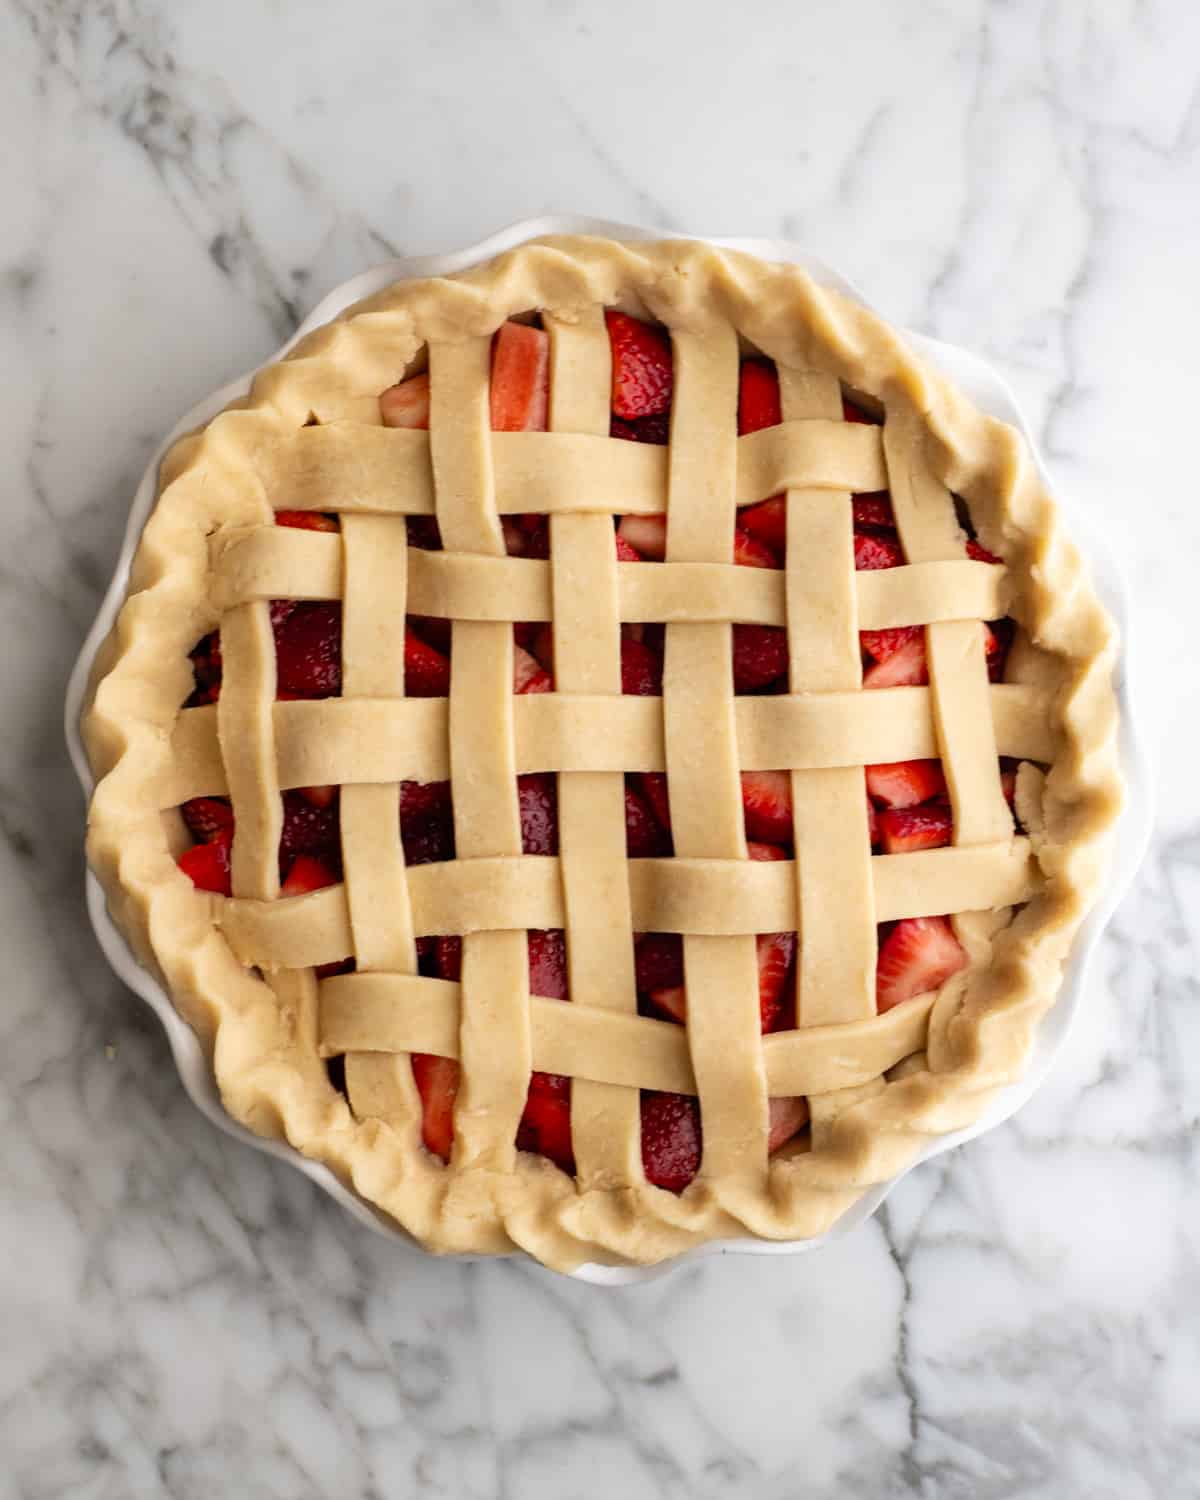 forming a lattice crust on top of a Strawberry Pie